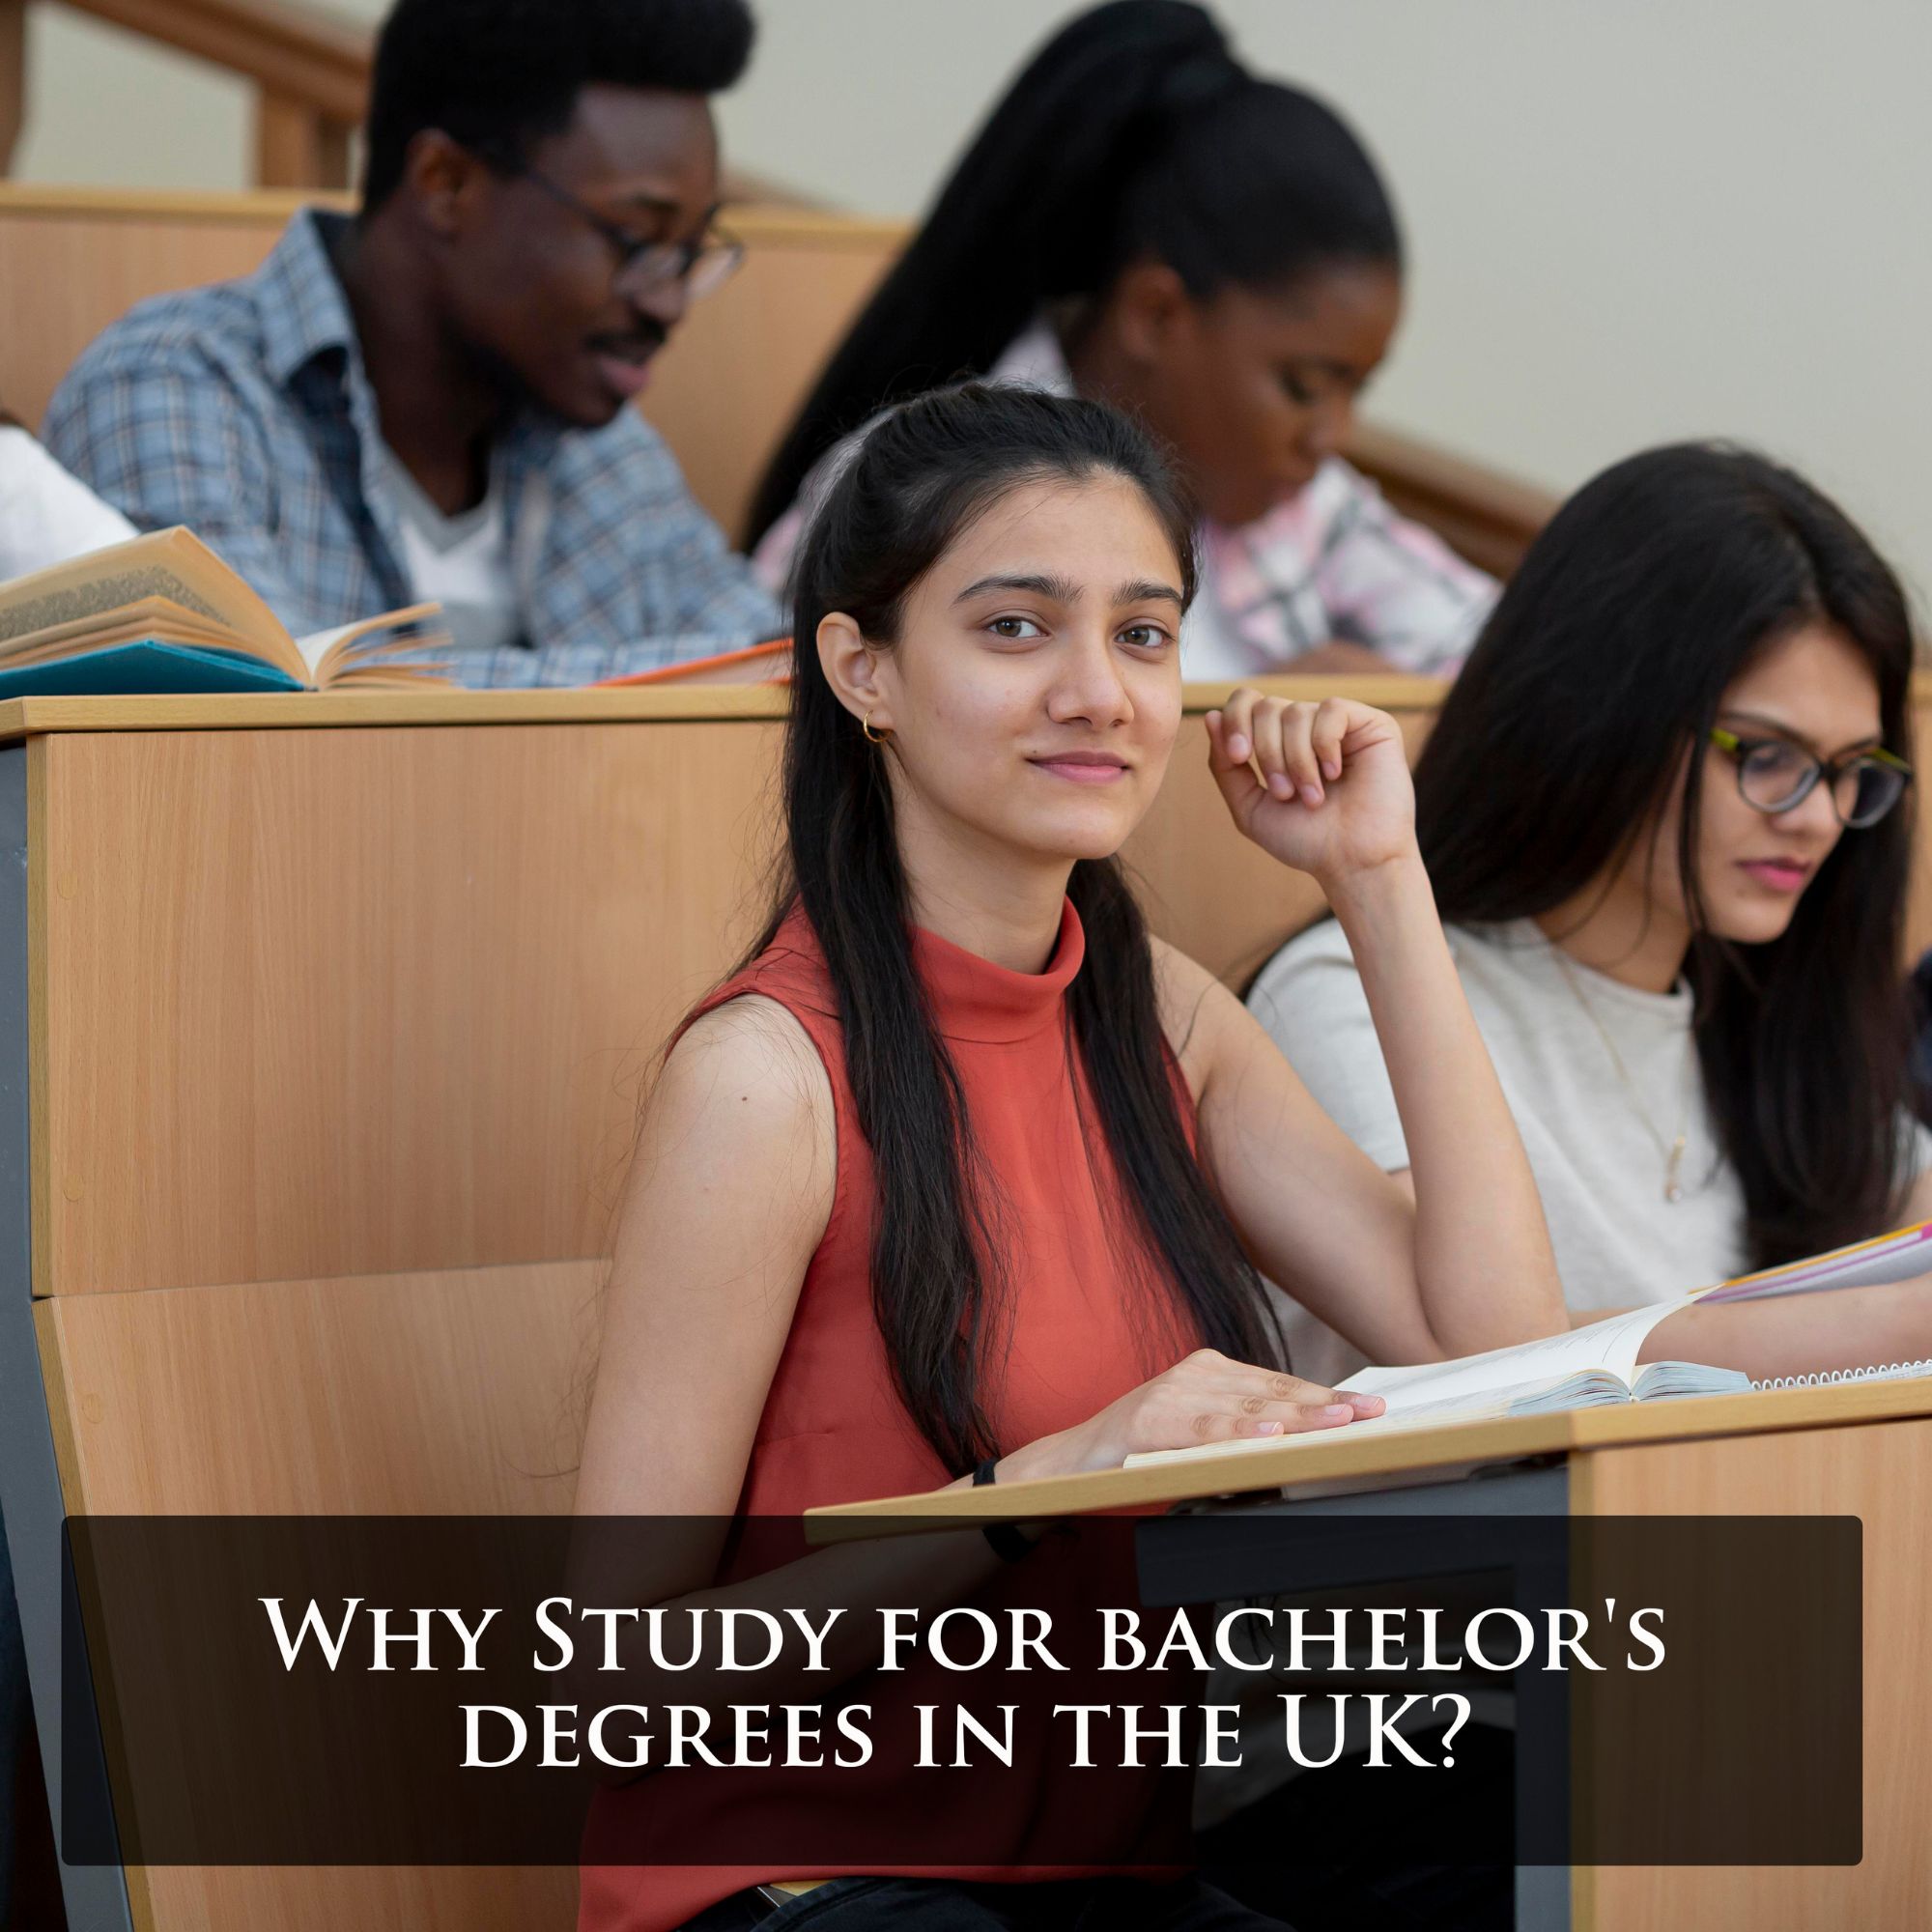 Why Study for bachelor’s degrees in the UK?